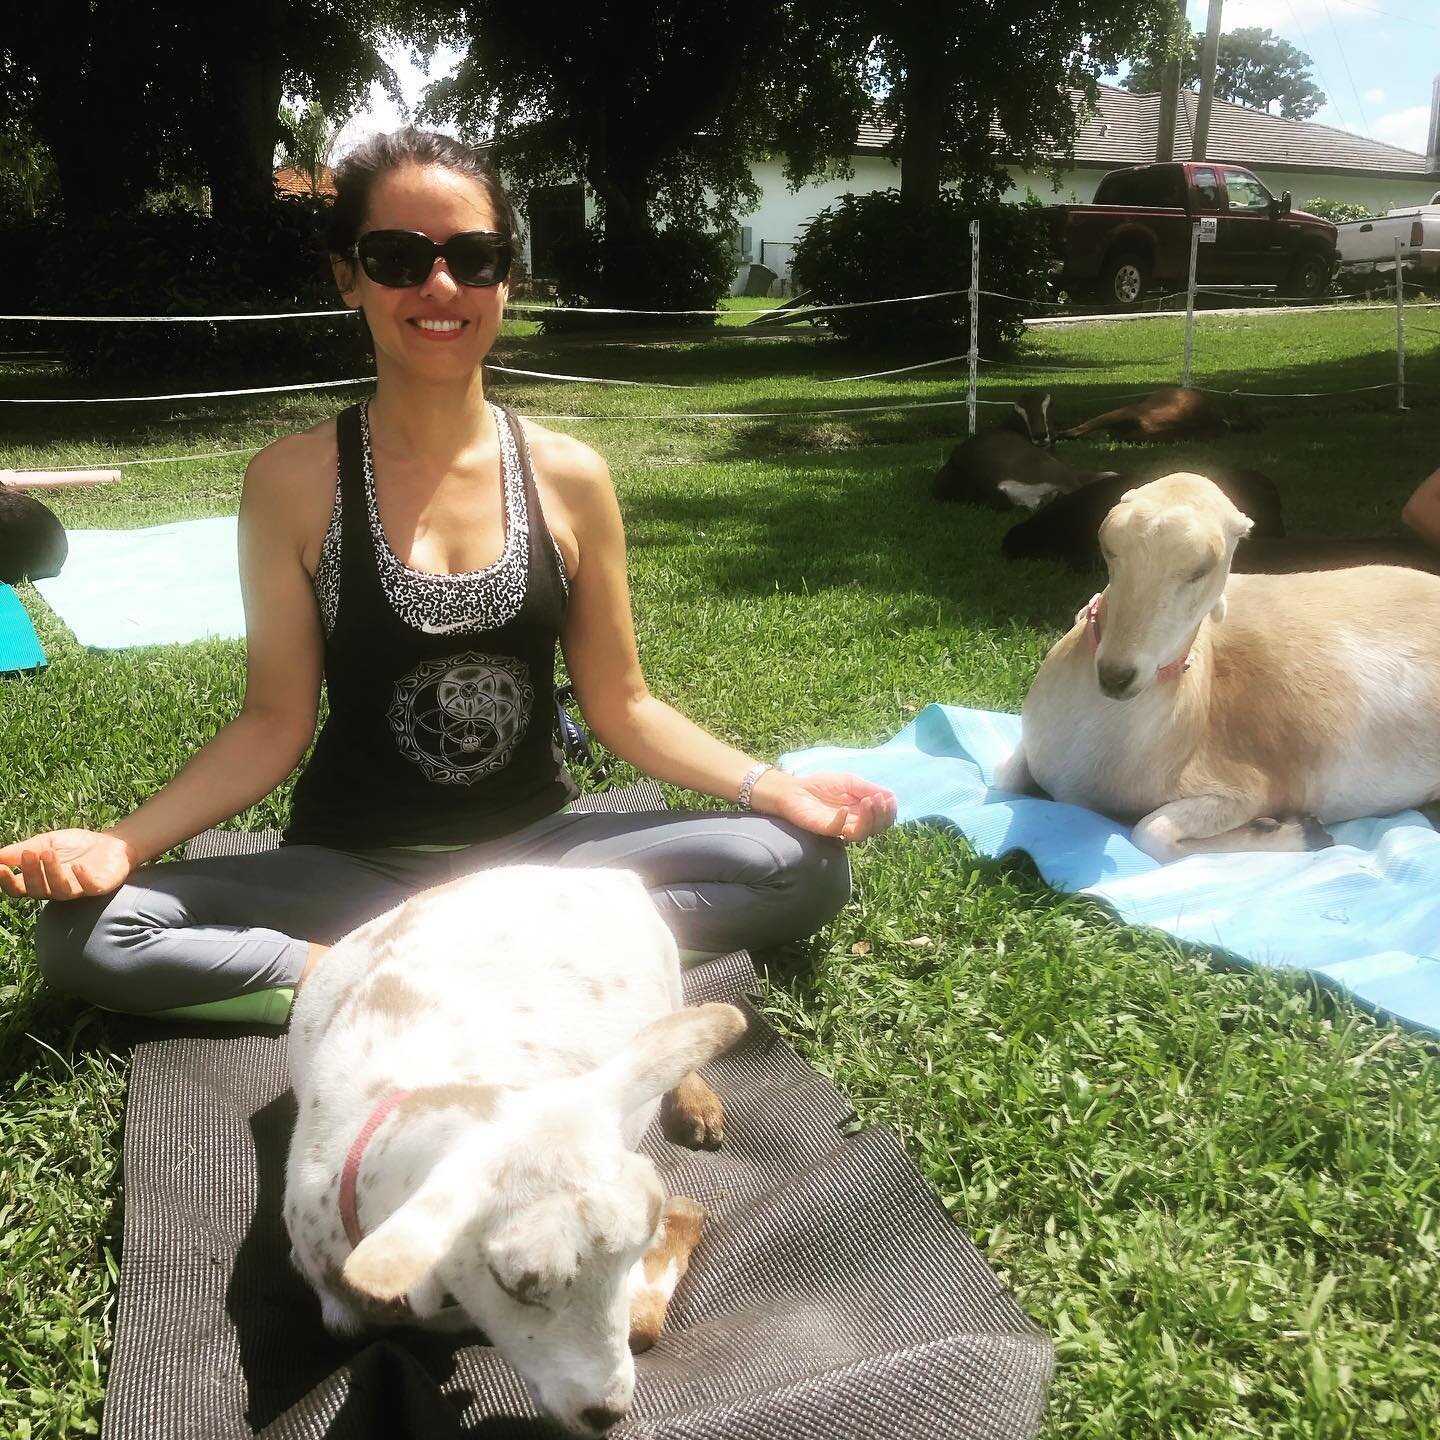 Happy Summer Solstice!! Celebrating with goat yoga @downwardgoat 💕🐐 these guys are so lovable!! #yogawithlittlegoats #summersolstice2020 #greatfatherspirit